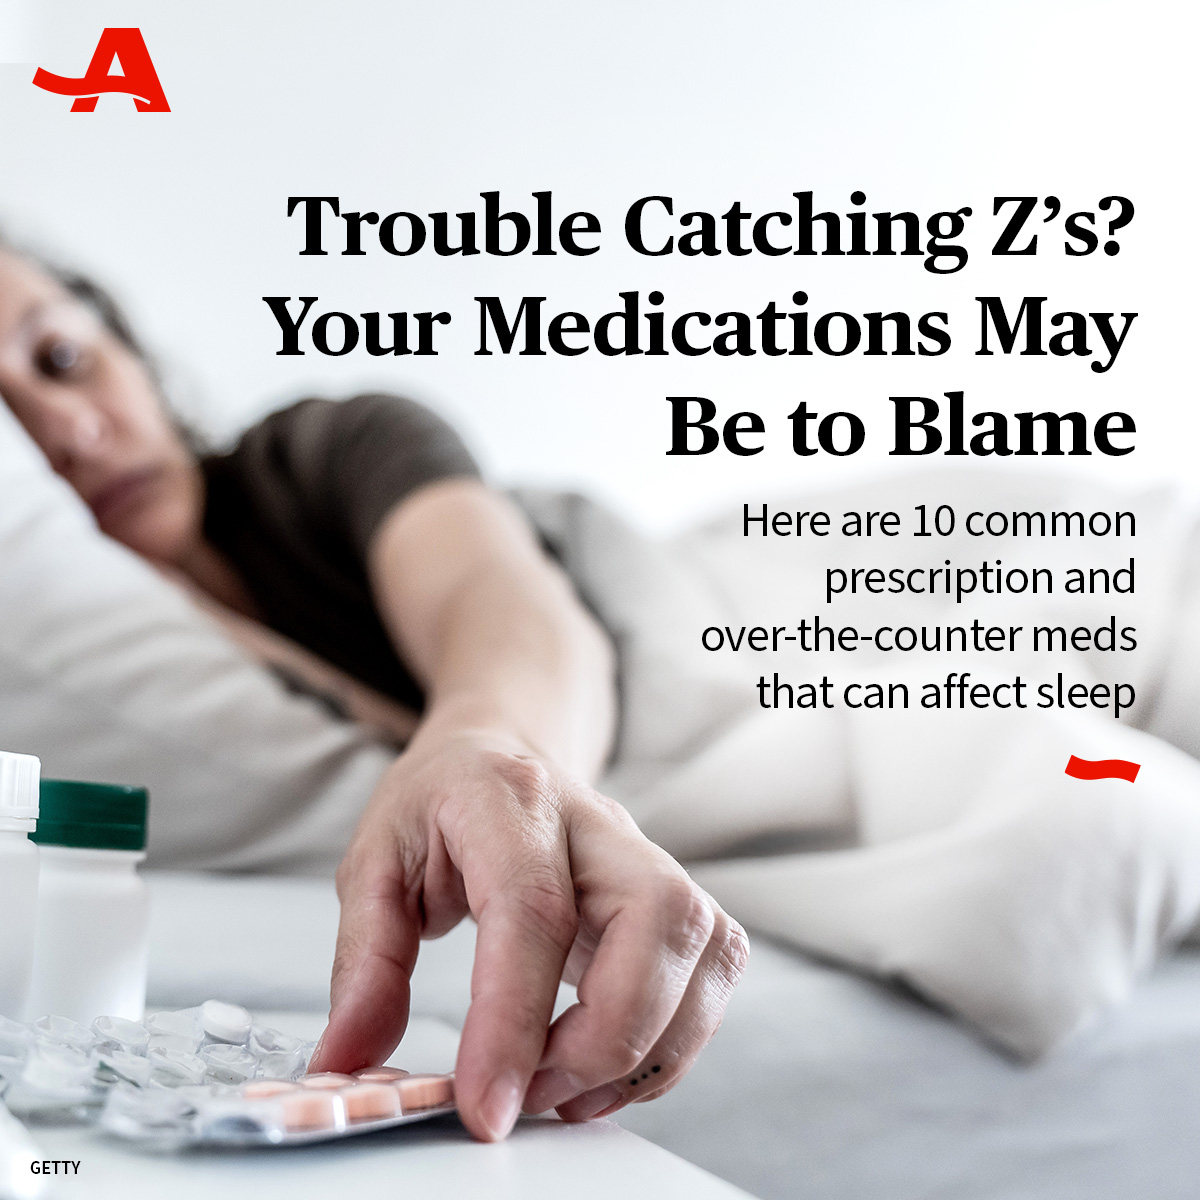 Trouble catching z’s? Your prescription and over-the-counter meds may be to blame. See why: spr.ly/6017bcpjT